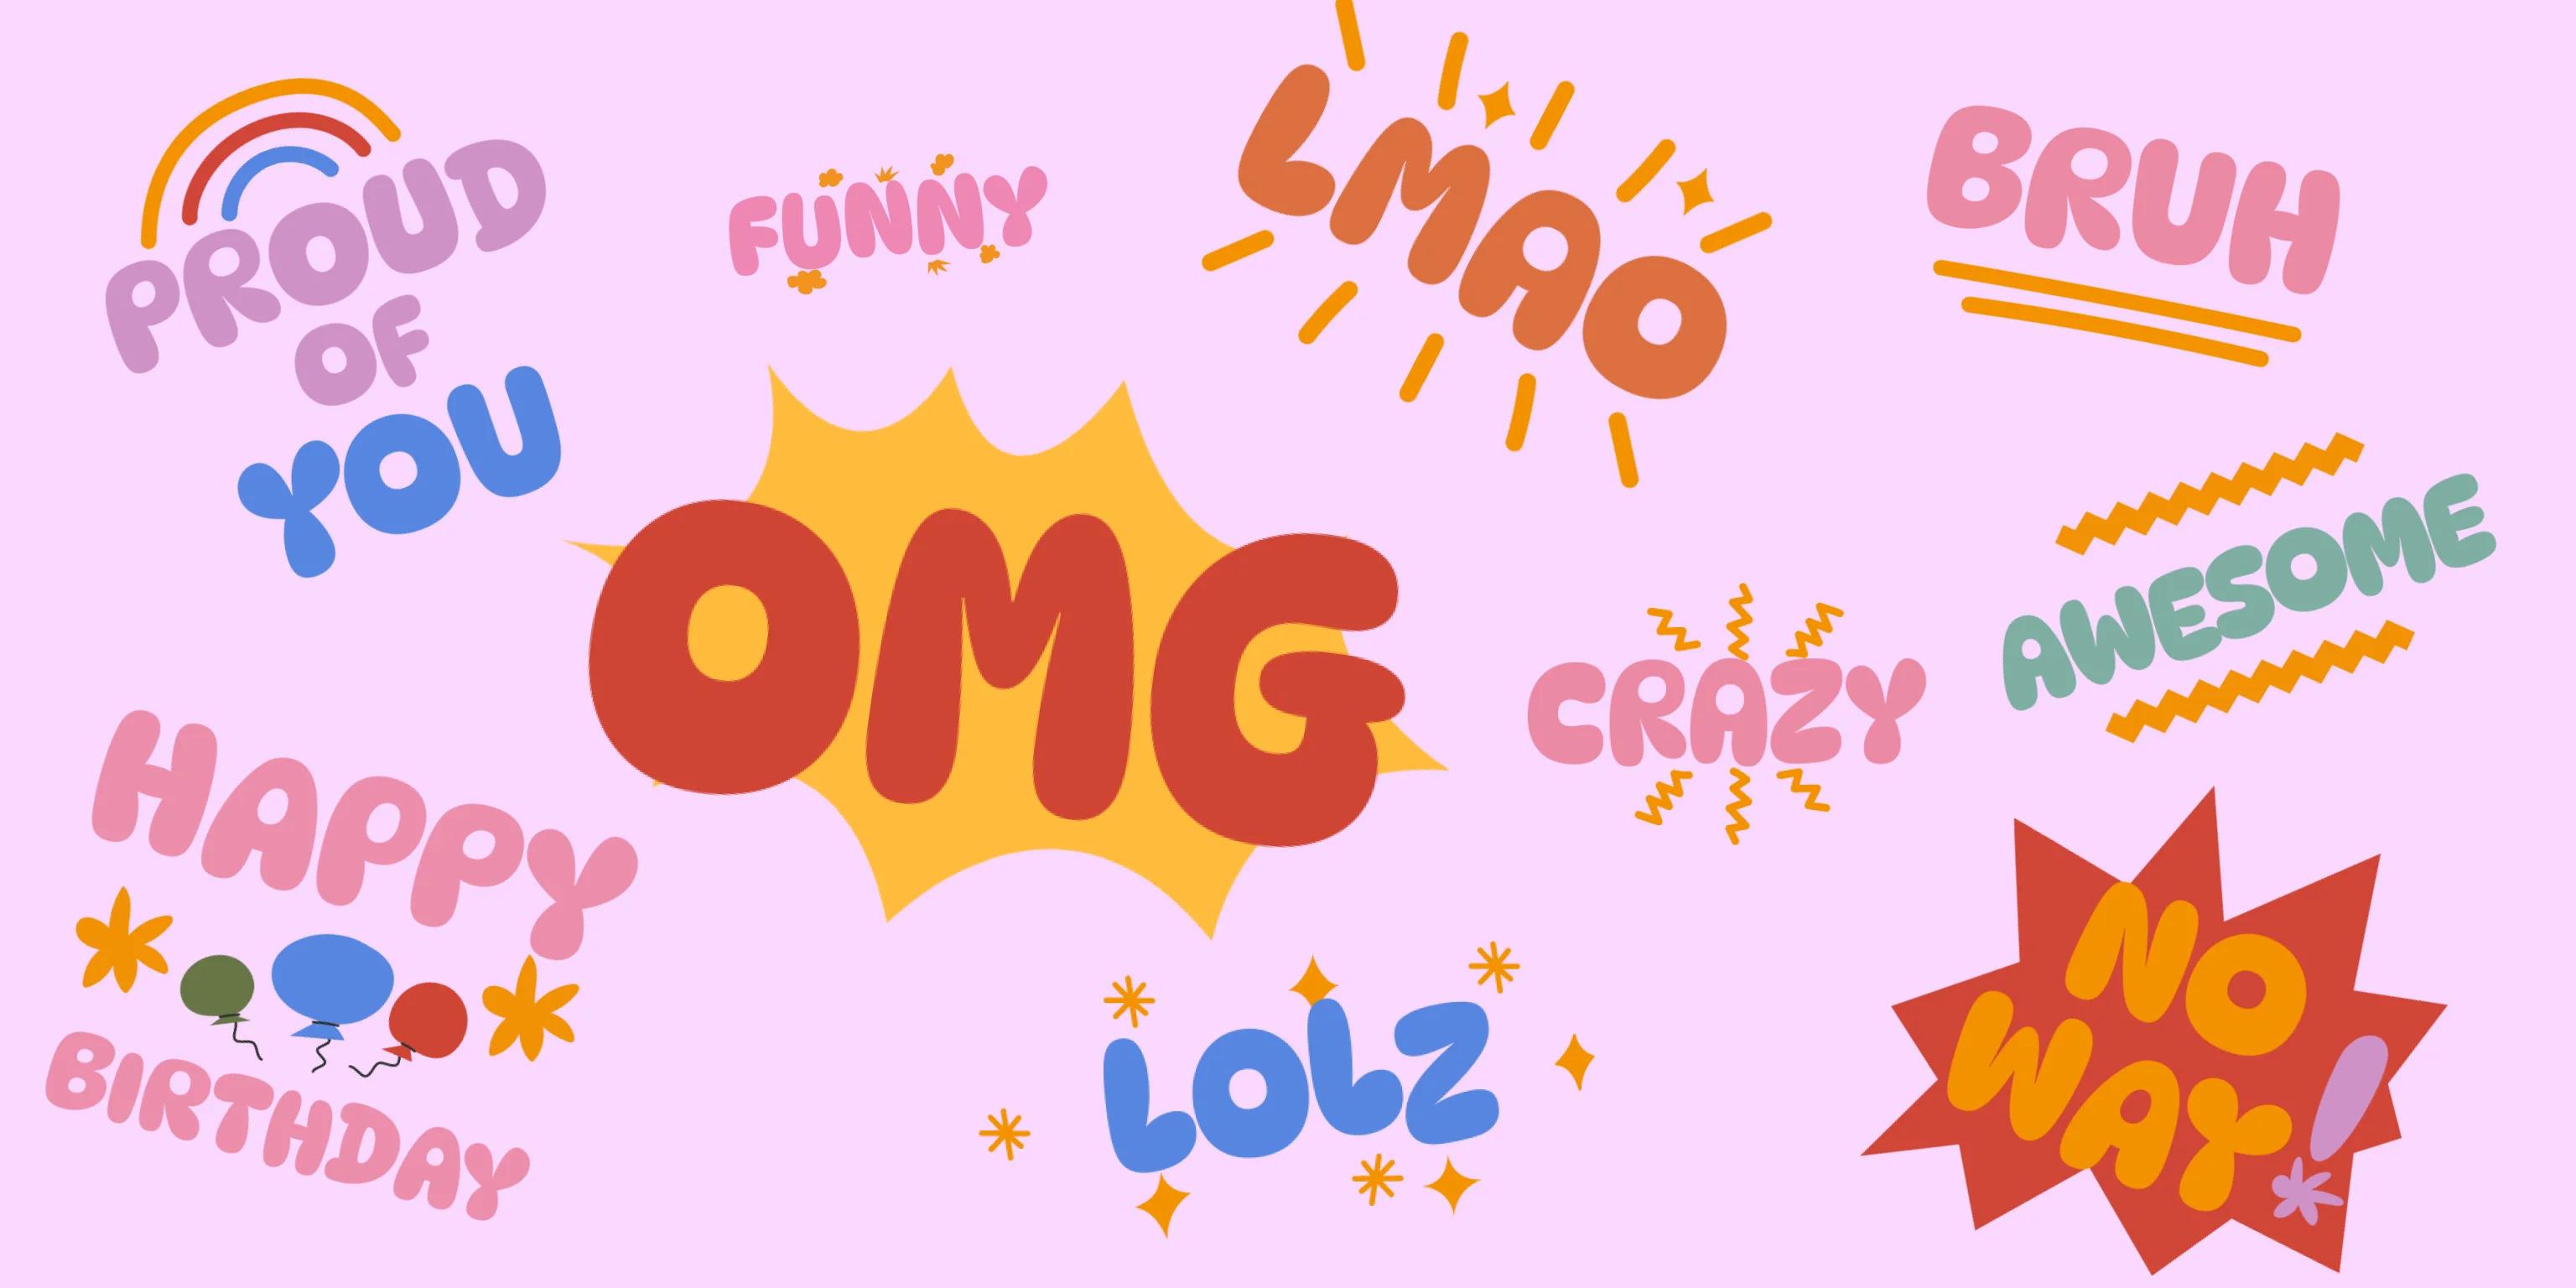 10 sticker-like graphics with fun phrases like OMG and LMAO on a purple background